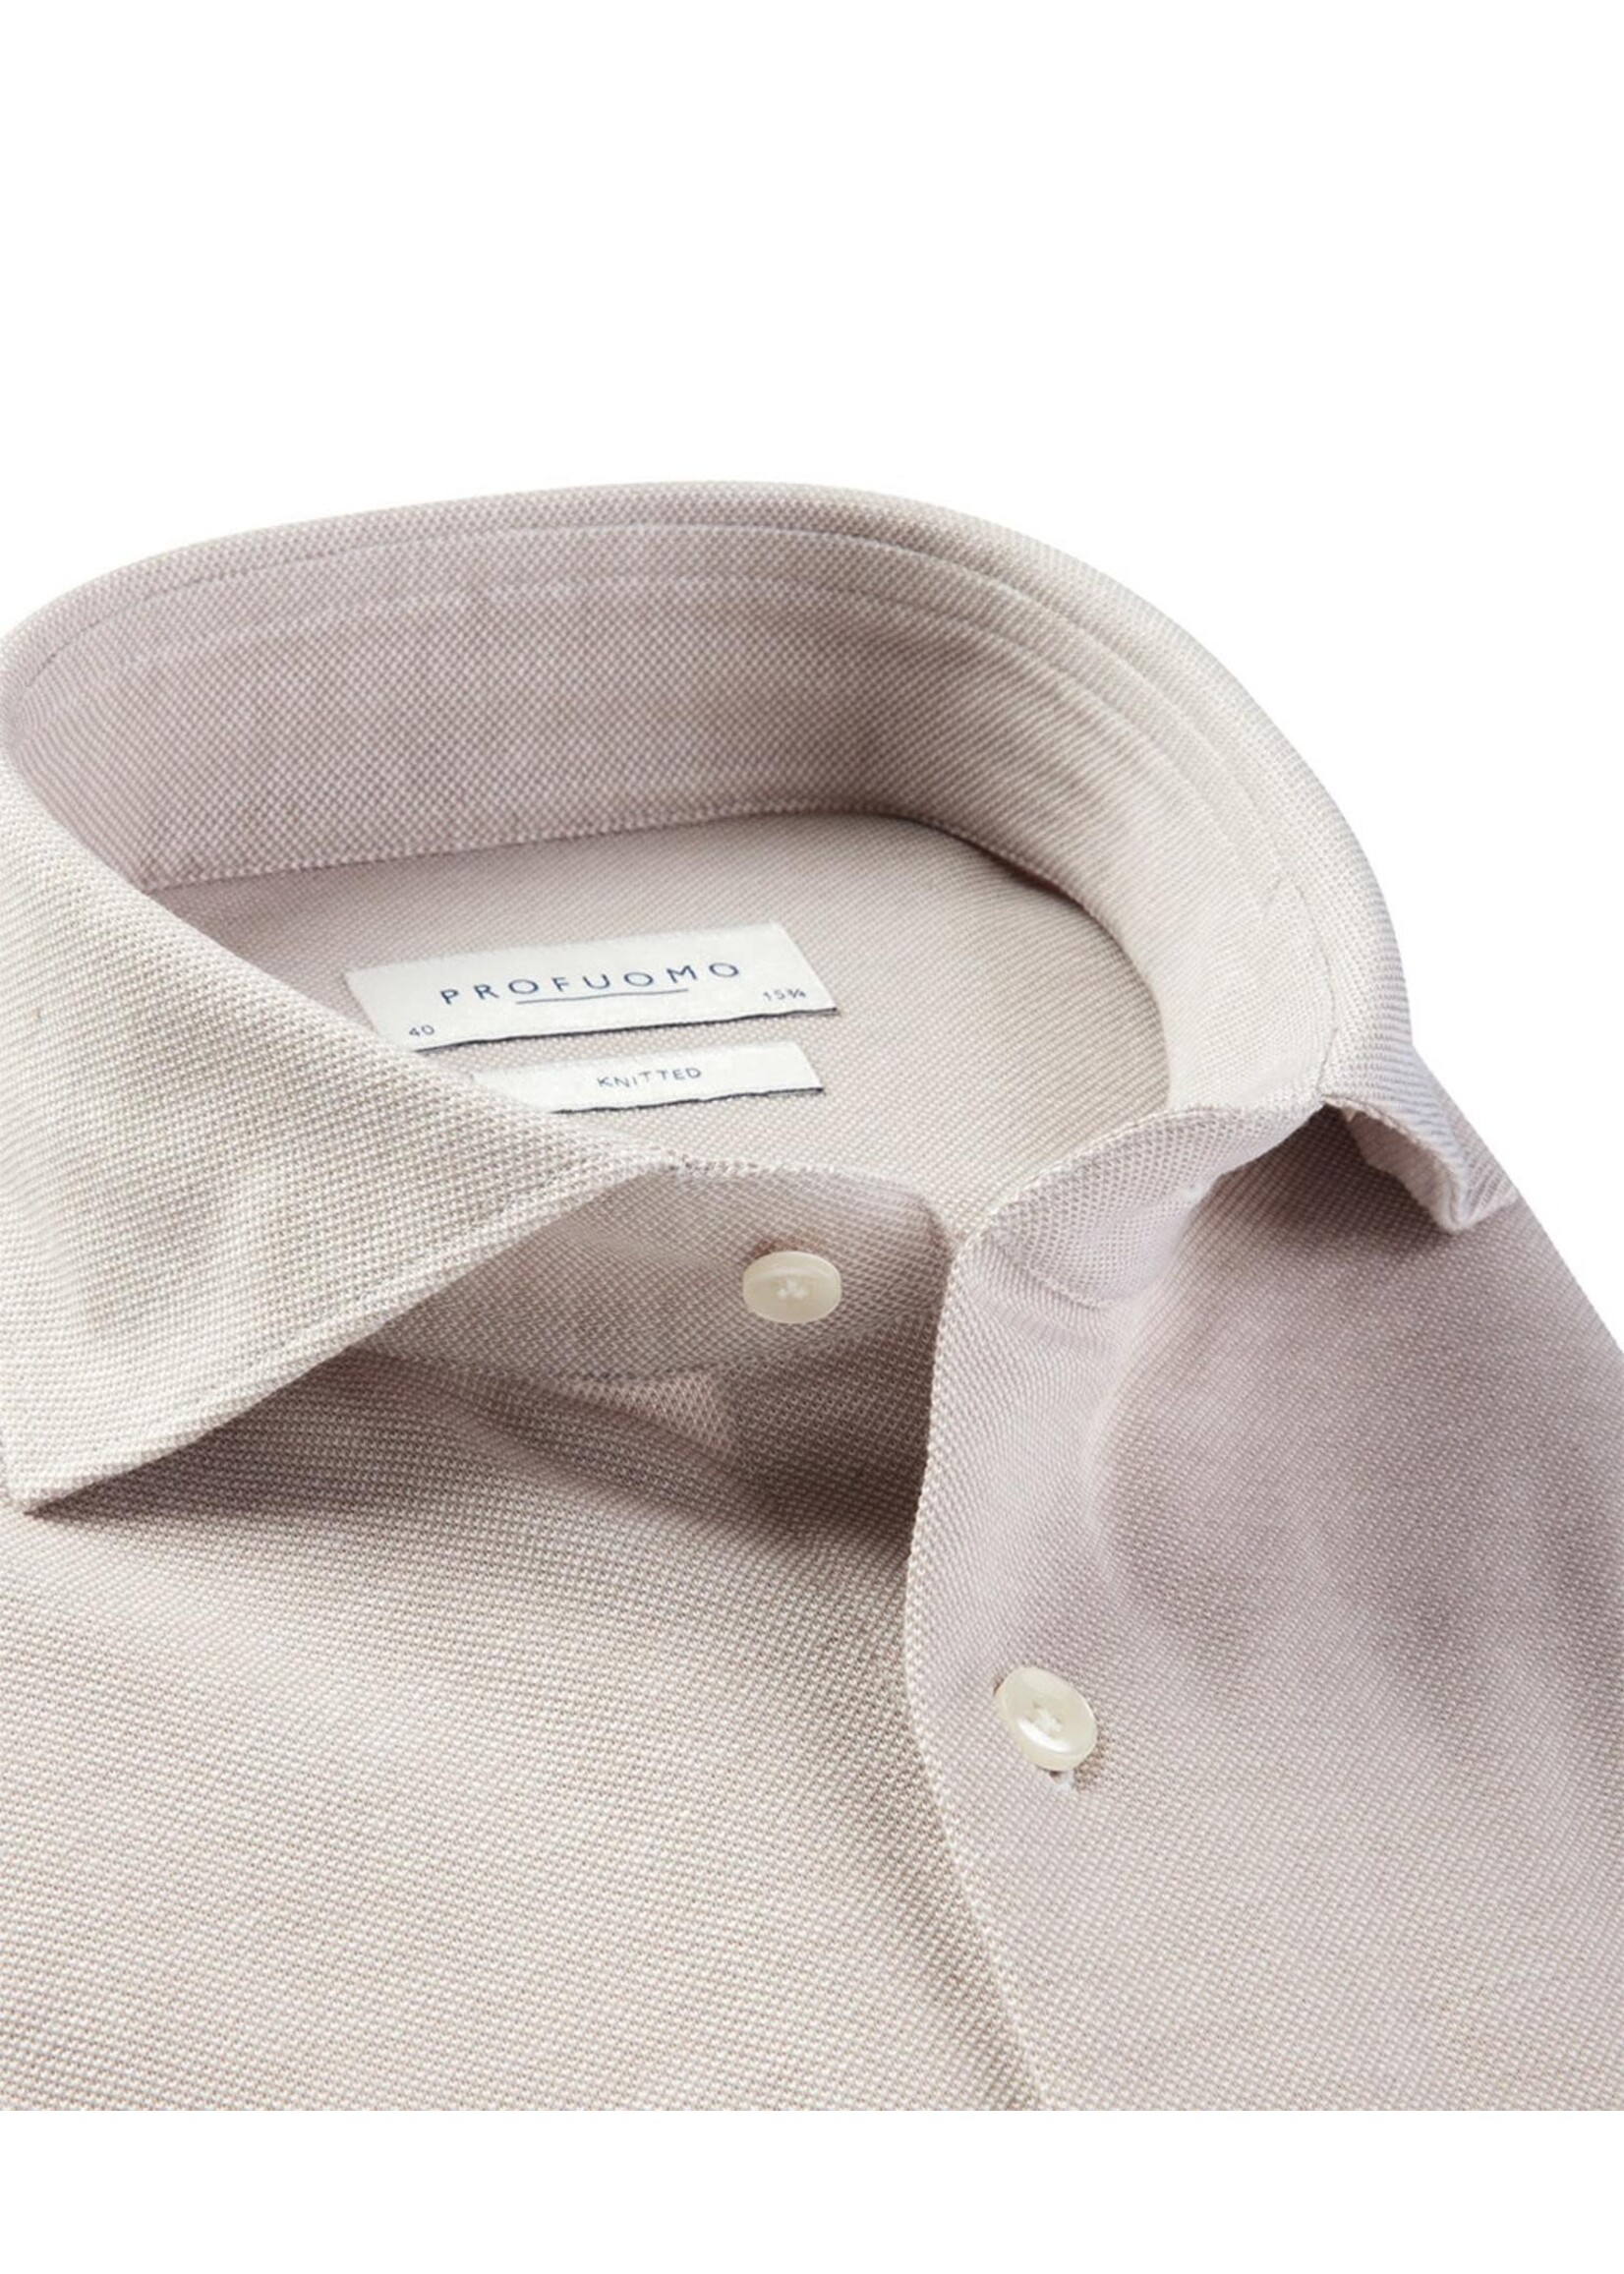 Profuomo Beige Knitted Shirt